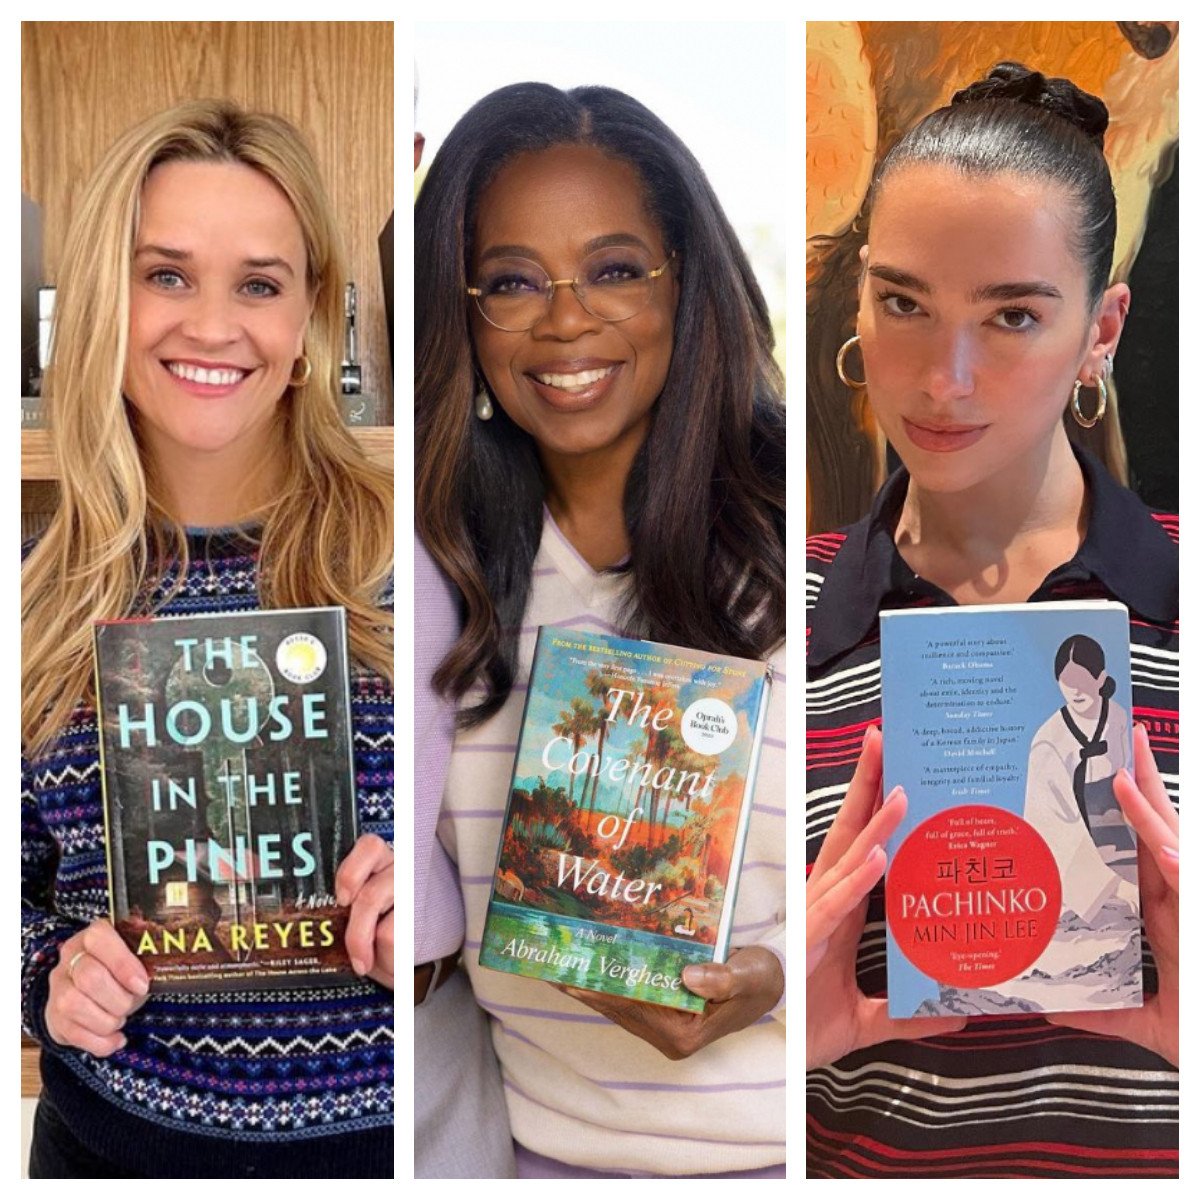 Reese Witherspoon, Oprah Winfrey and Dua Lipa all lead their own book clubs. Photos: @reesesbookclub, @oprahsbookclub, @service95/Instagram